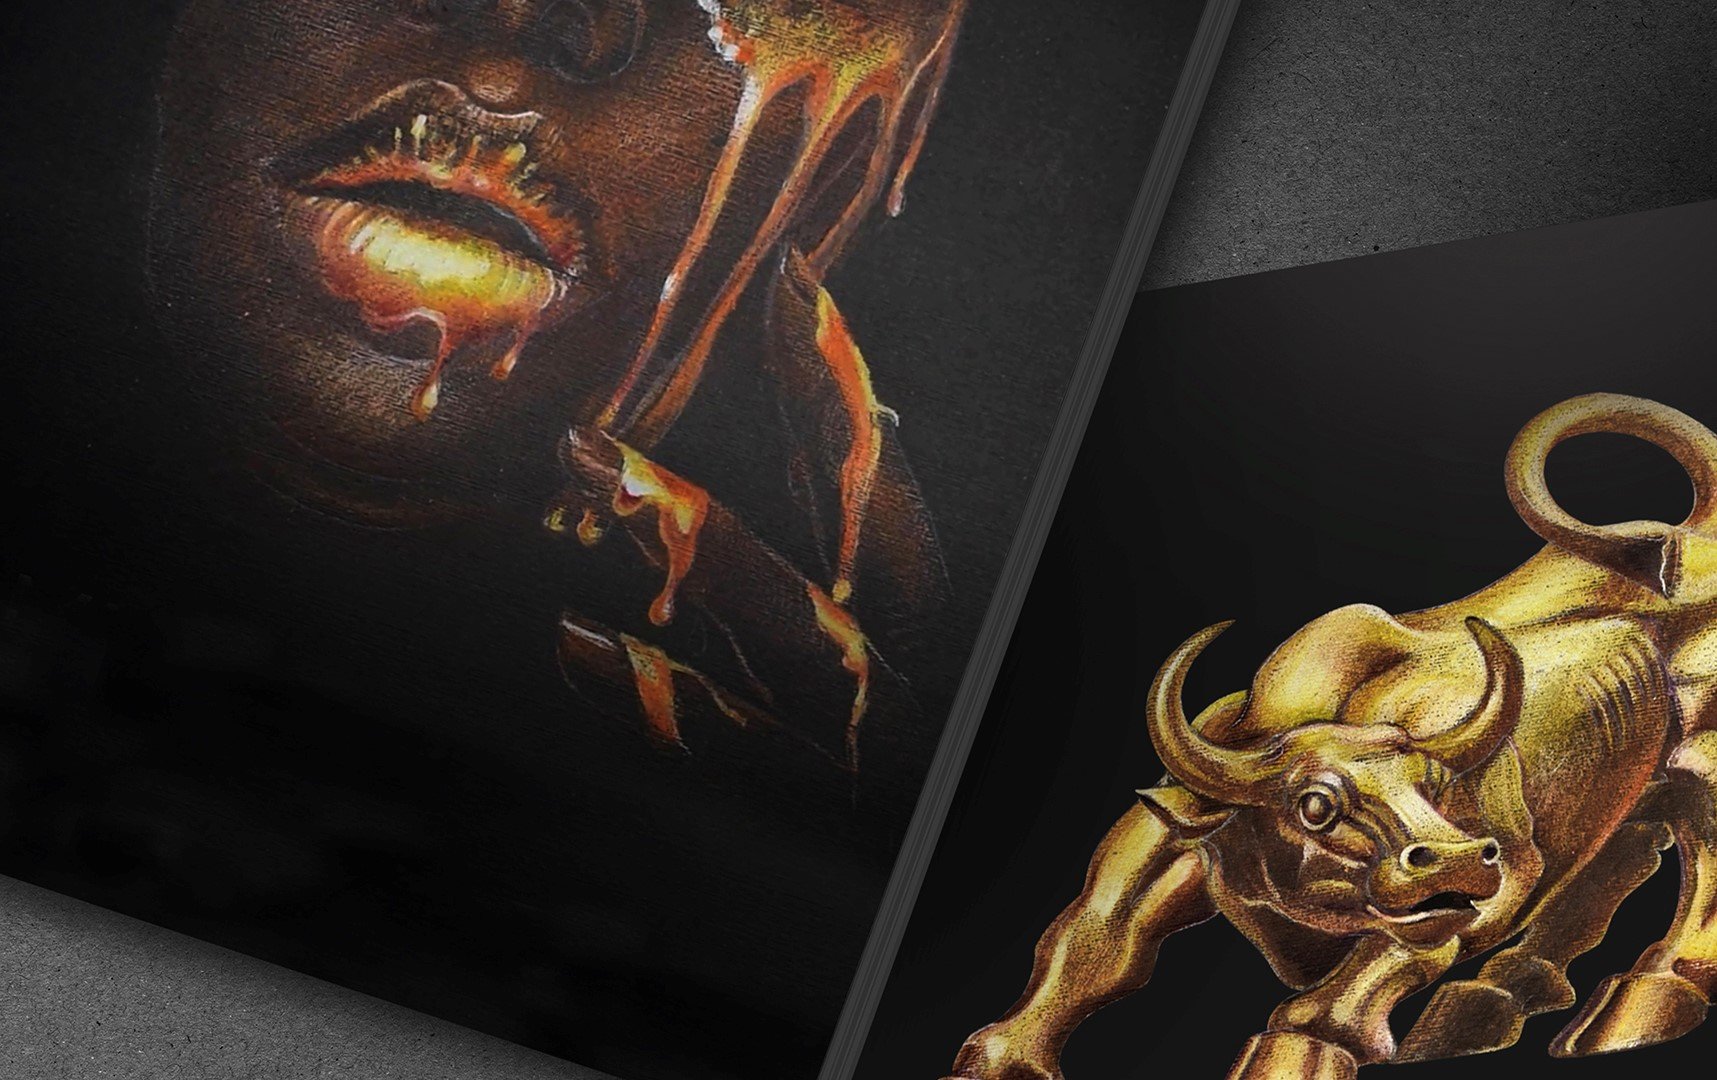 Two pieces of black paper with illustrations on each. One shows a portrait with metallic orange liquid drips on the face, and the other is of a metallic gold bull that contrasts against the black background.